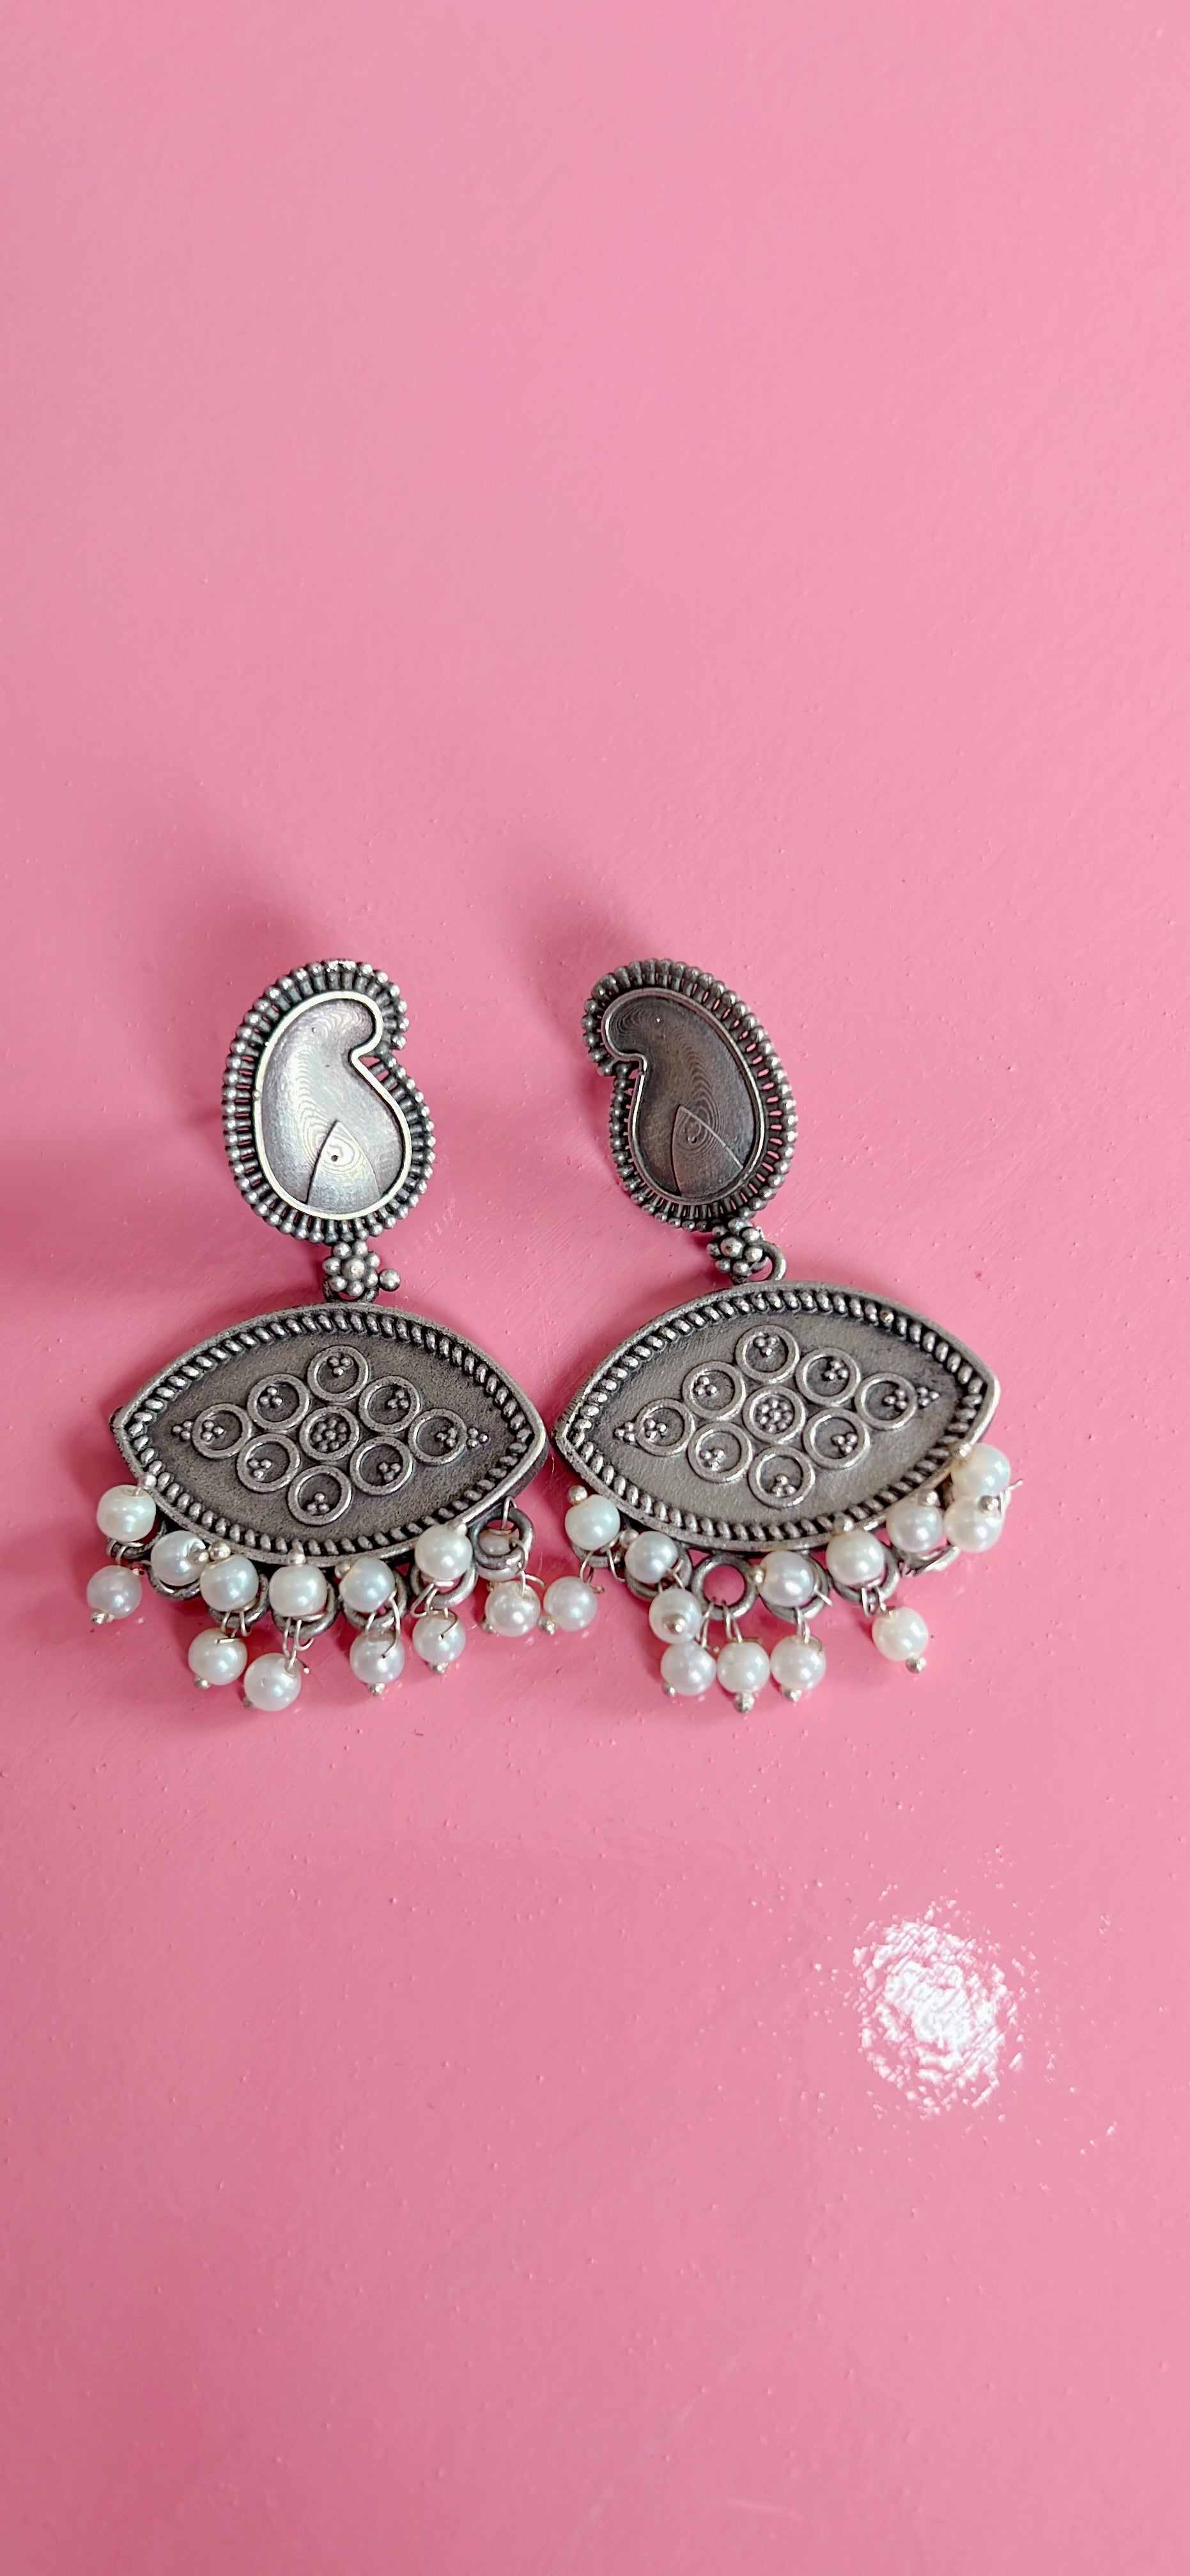 Oxidized silver earrings with dangling pearls